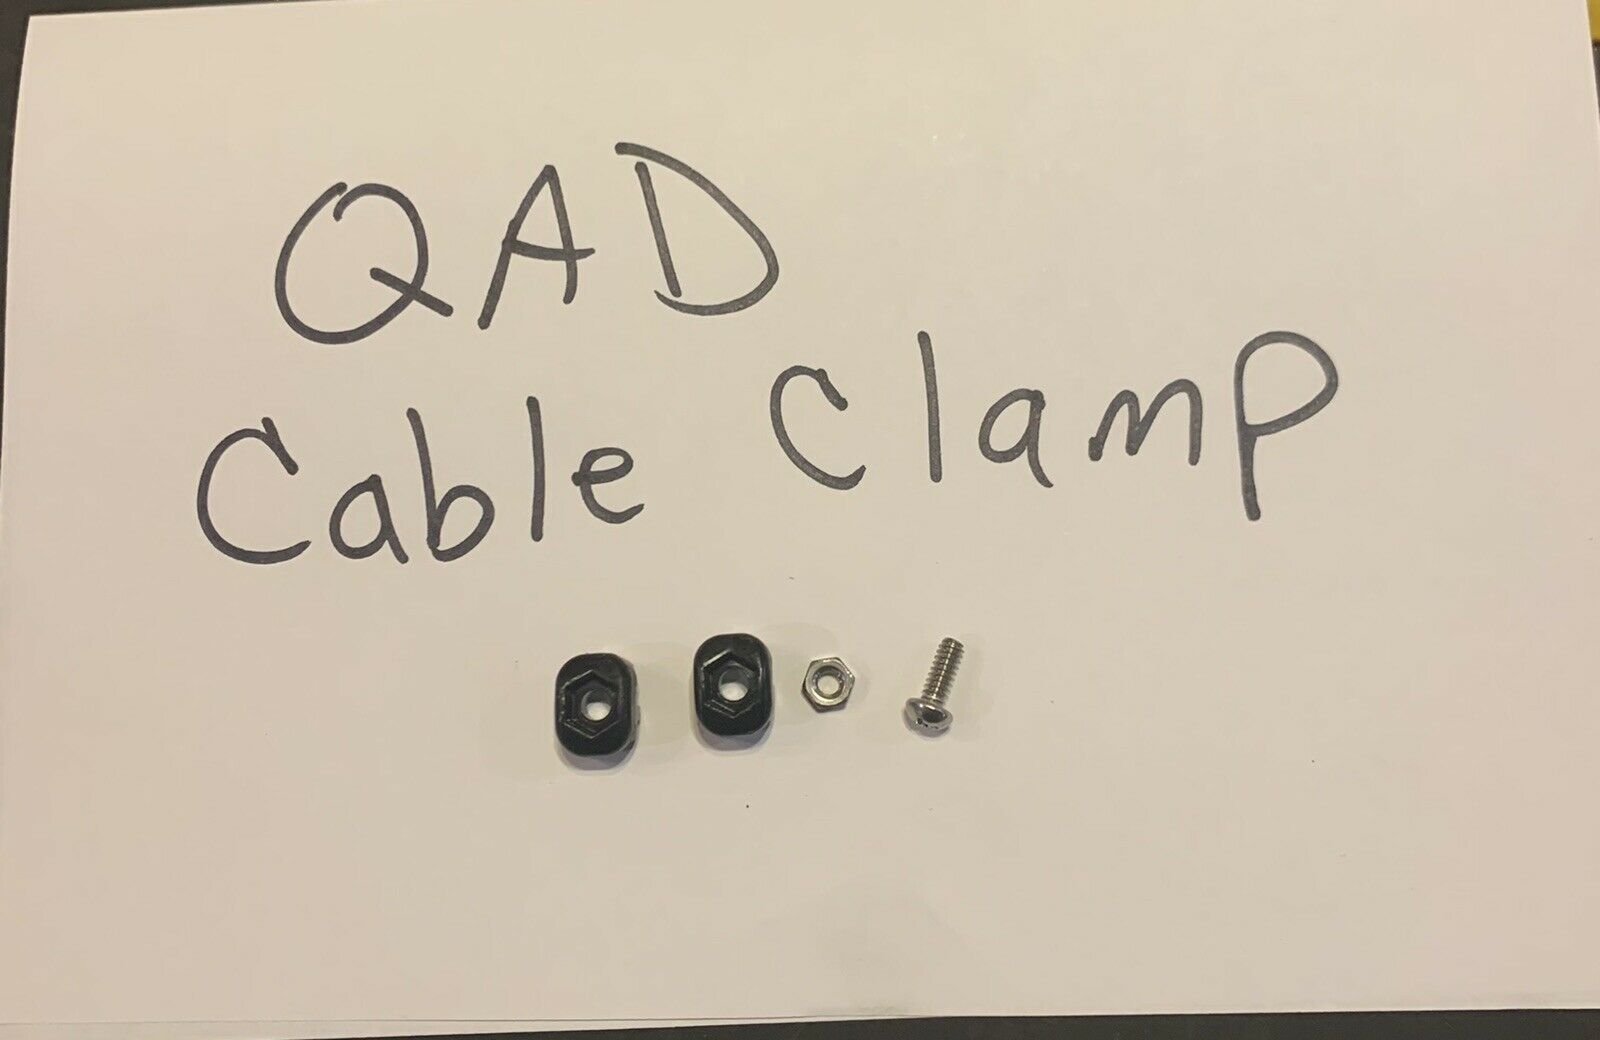 Qad Fall-away Cable Clamp